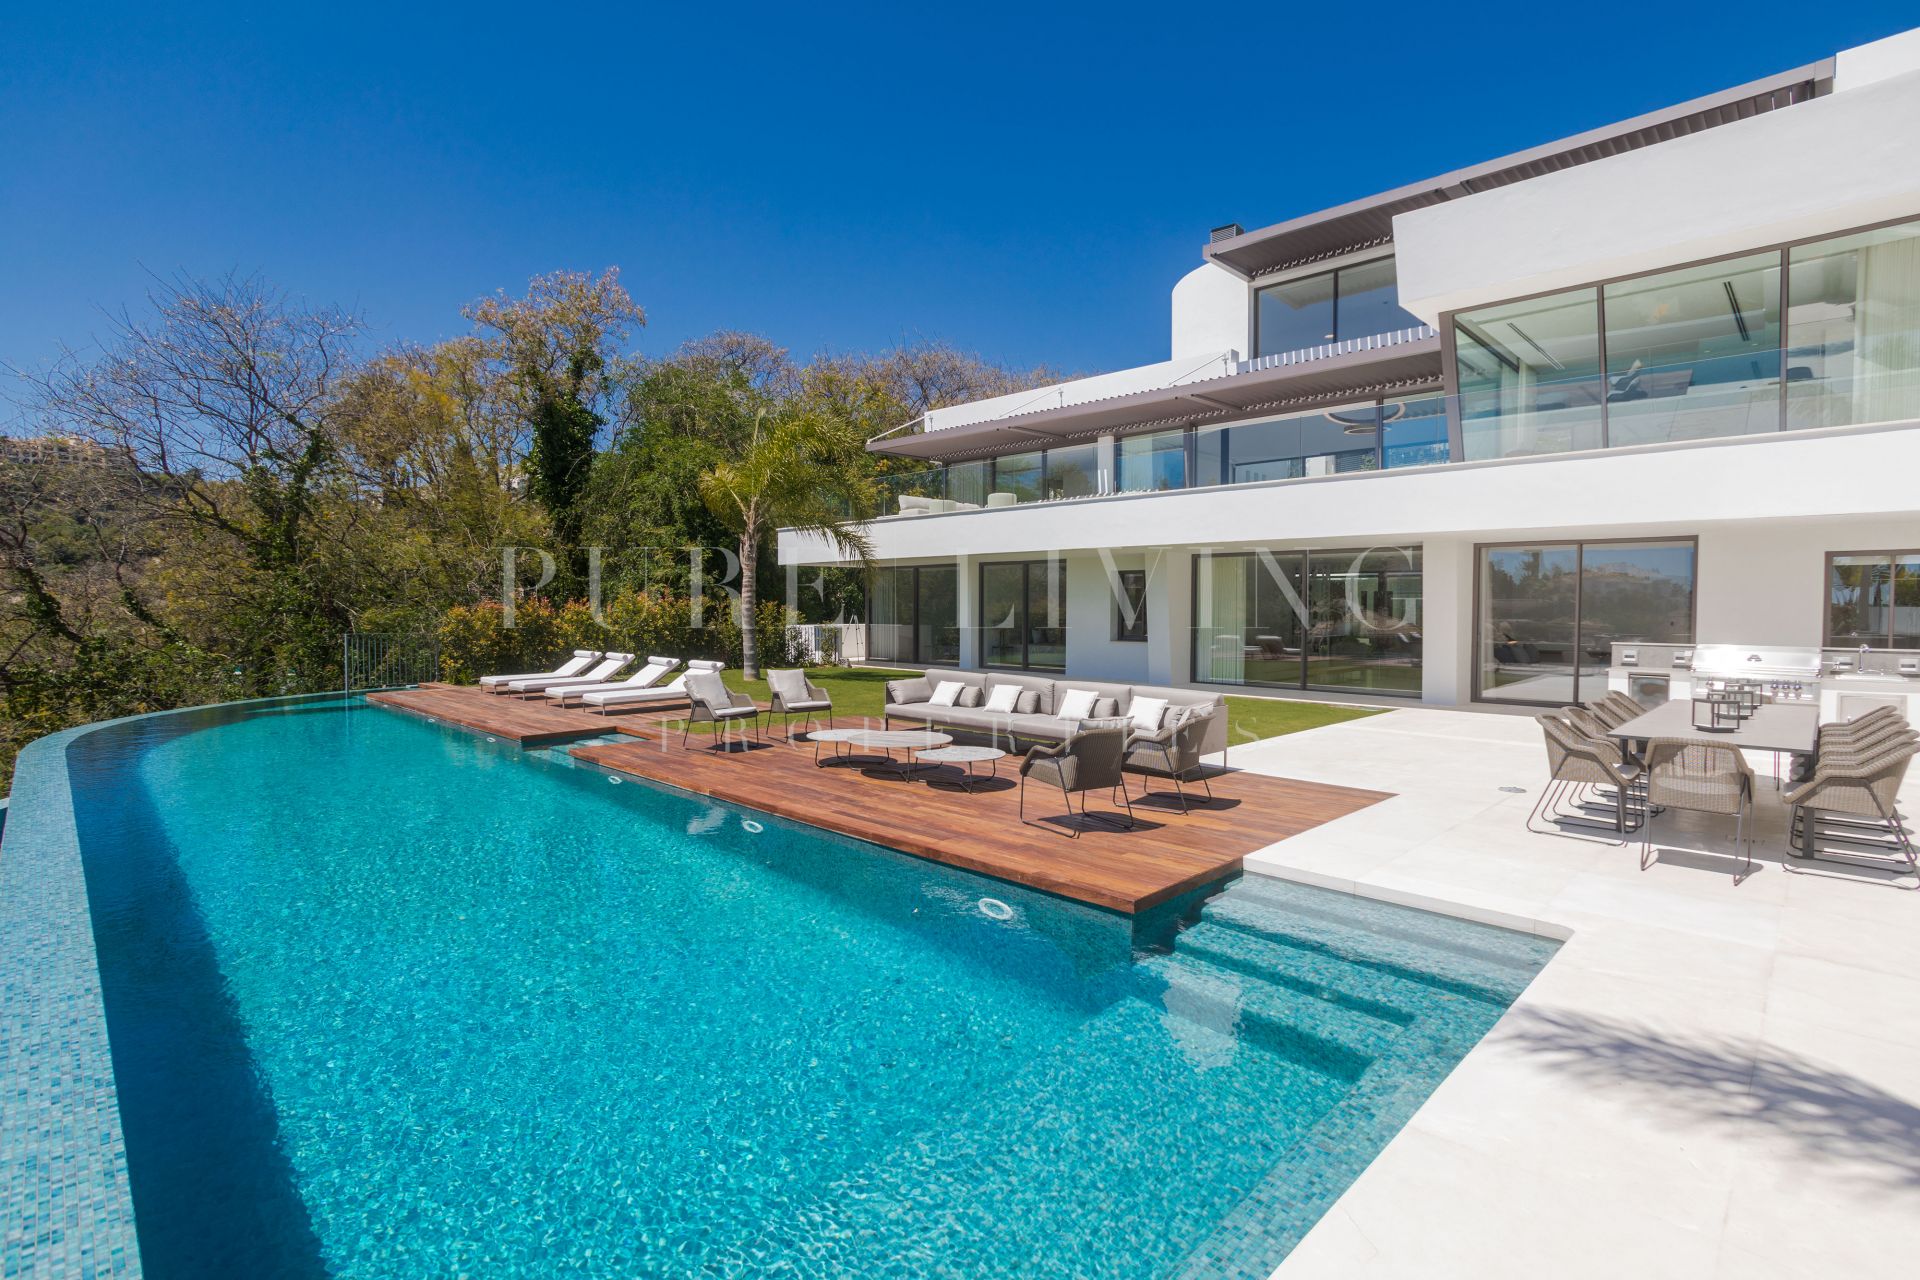 Brand new Villa situated in the privileged residential area of La Quinta, Benahavis